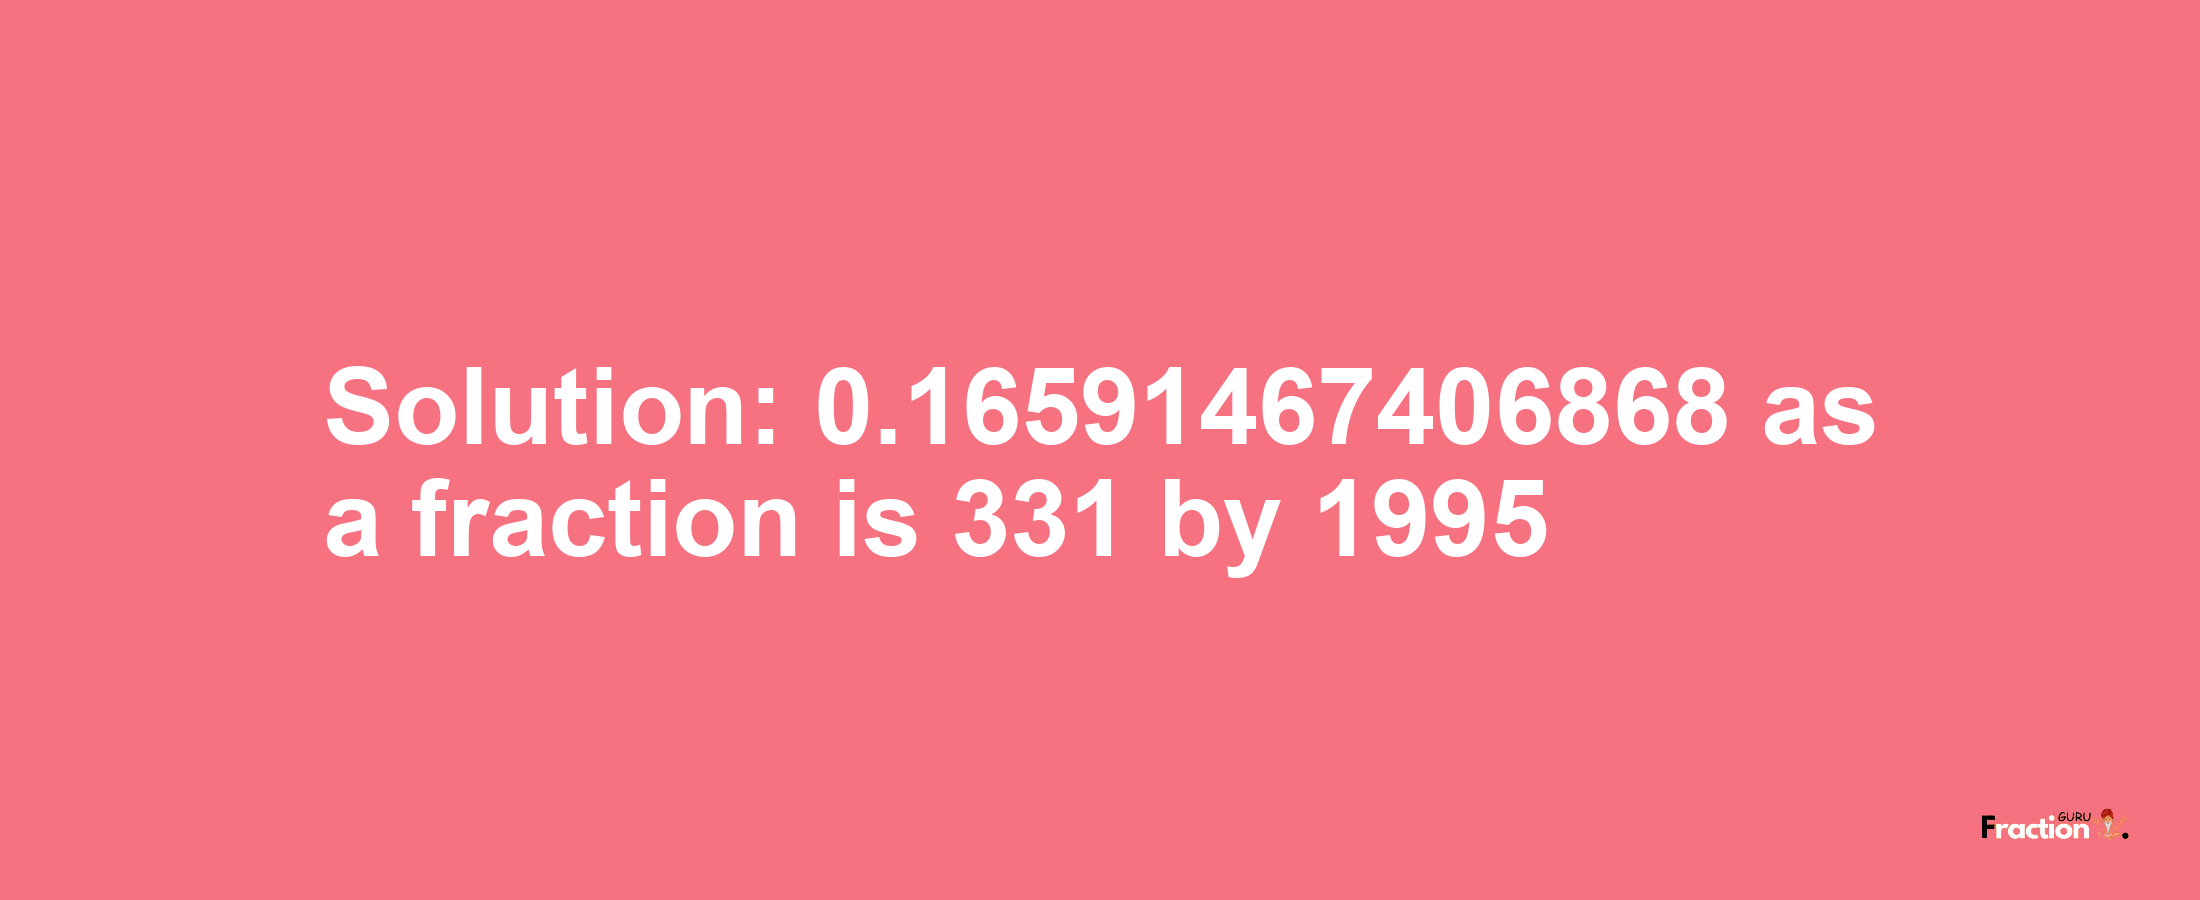 Solution:0.16591467406868 as a fraction is 331/1995